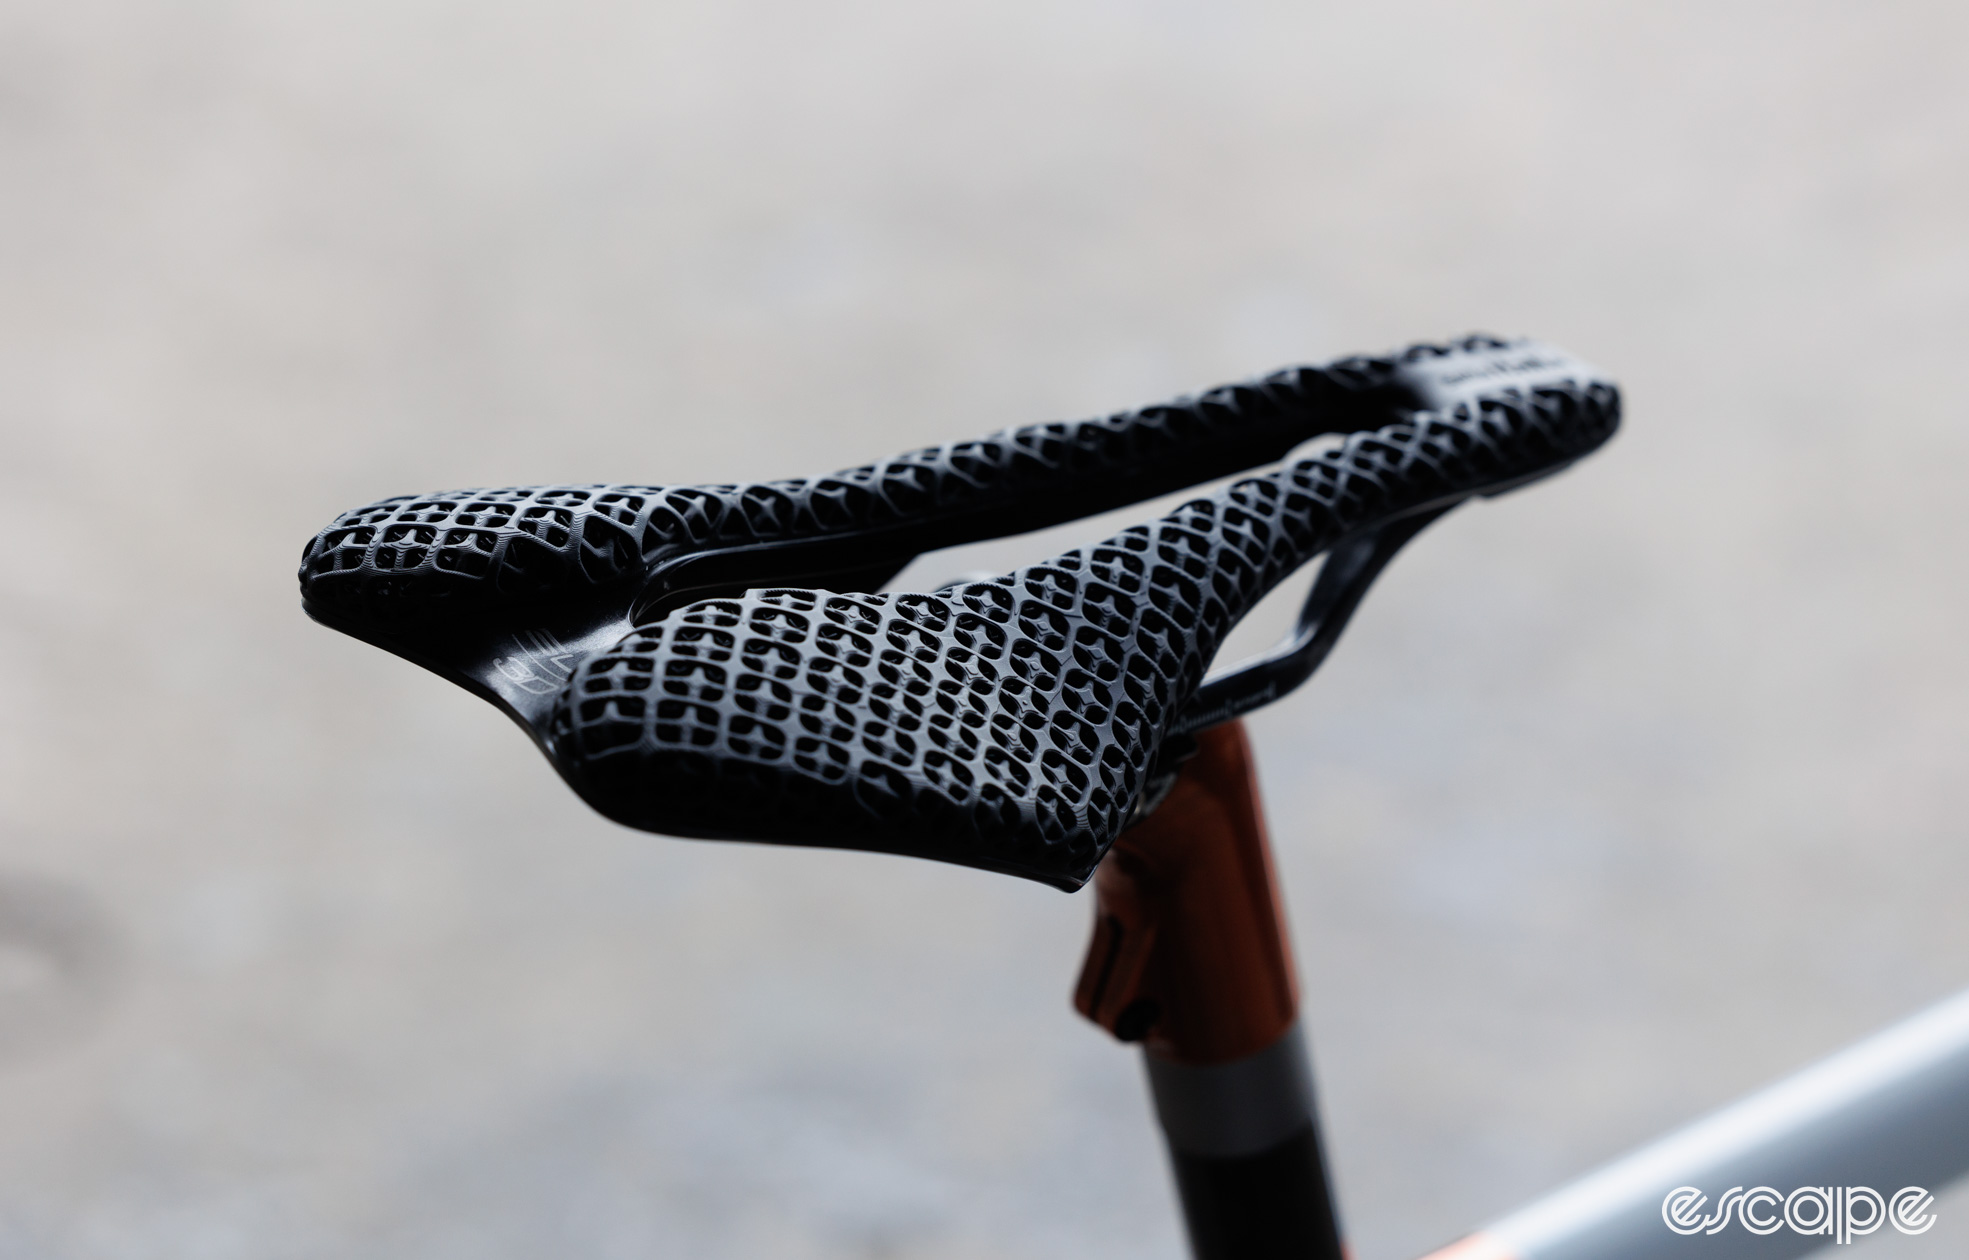 3D printed saddle from Selle Italia. 